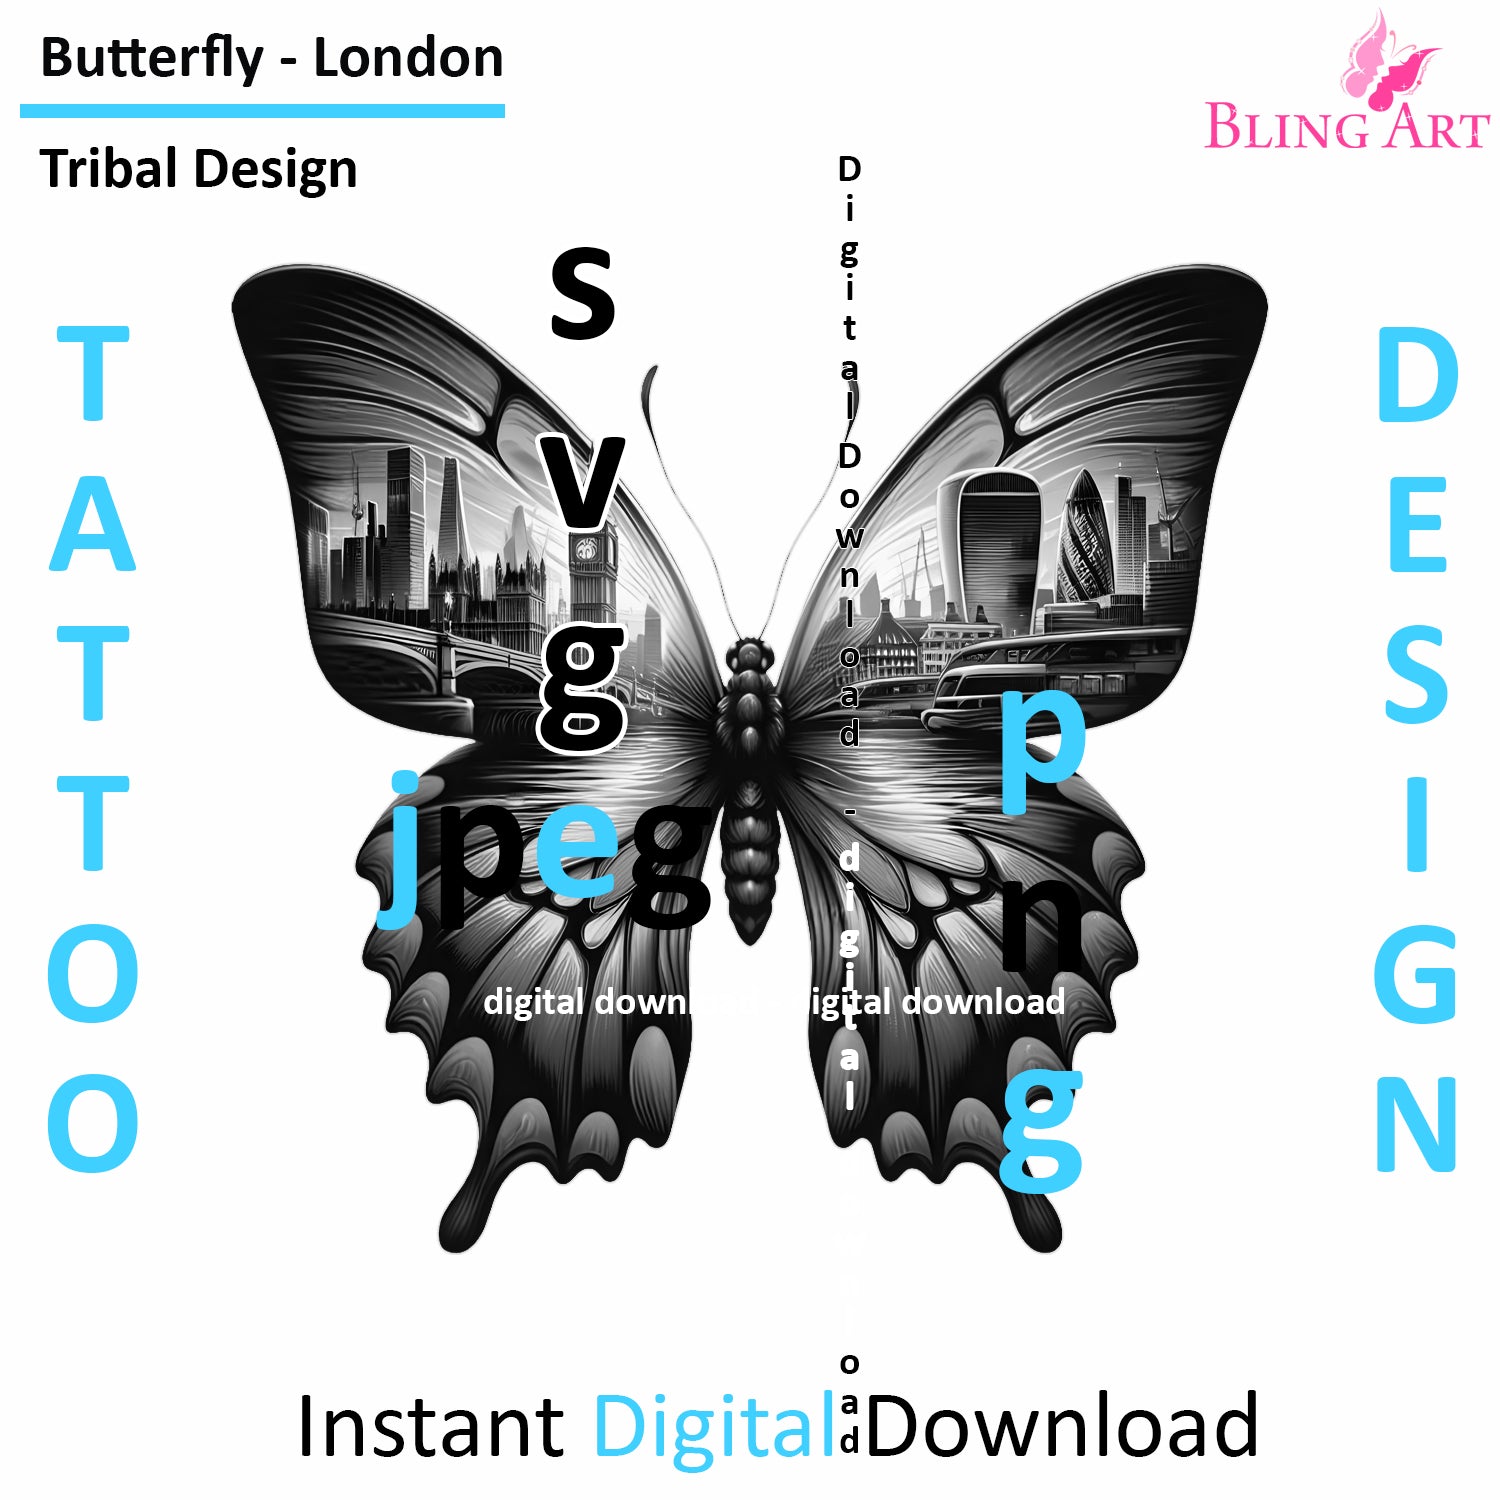 London Butterfly - Cityscape Digital Tattoo Art (PNG, JPEG, SVG) - Instant Download for Tattoos, Apparel